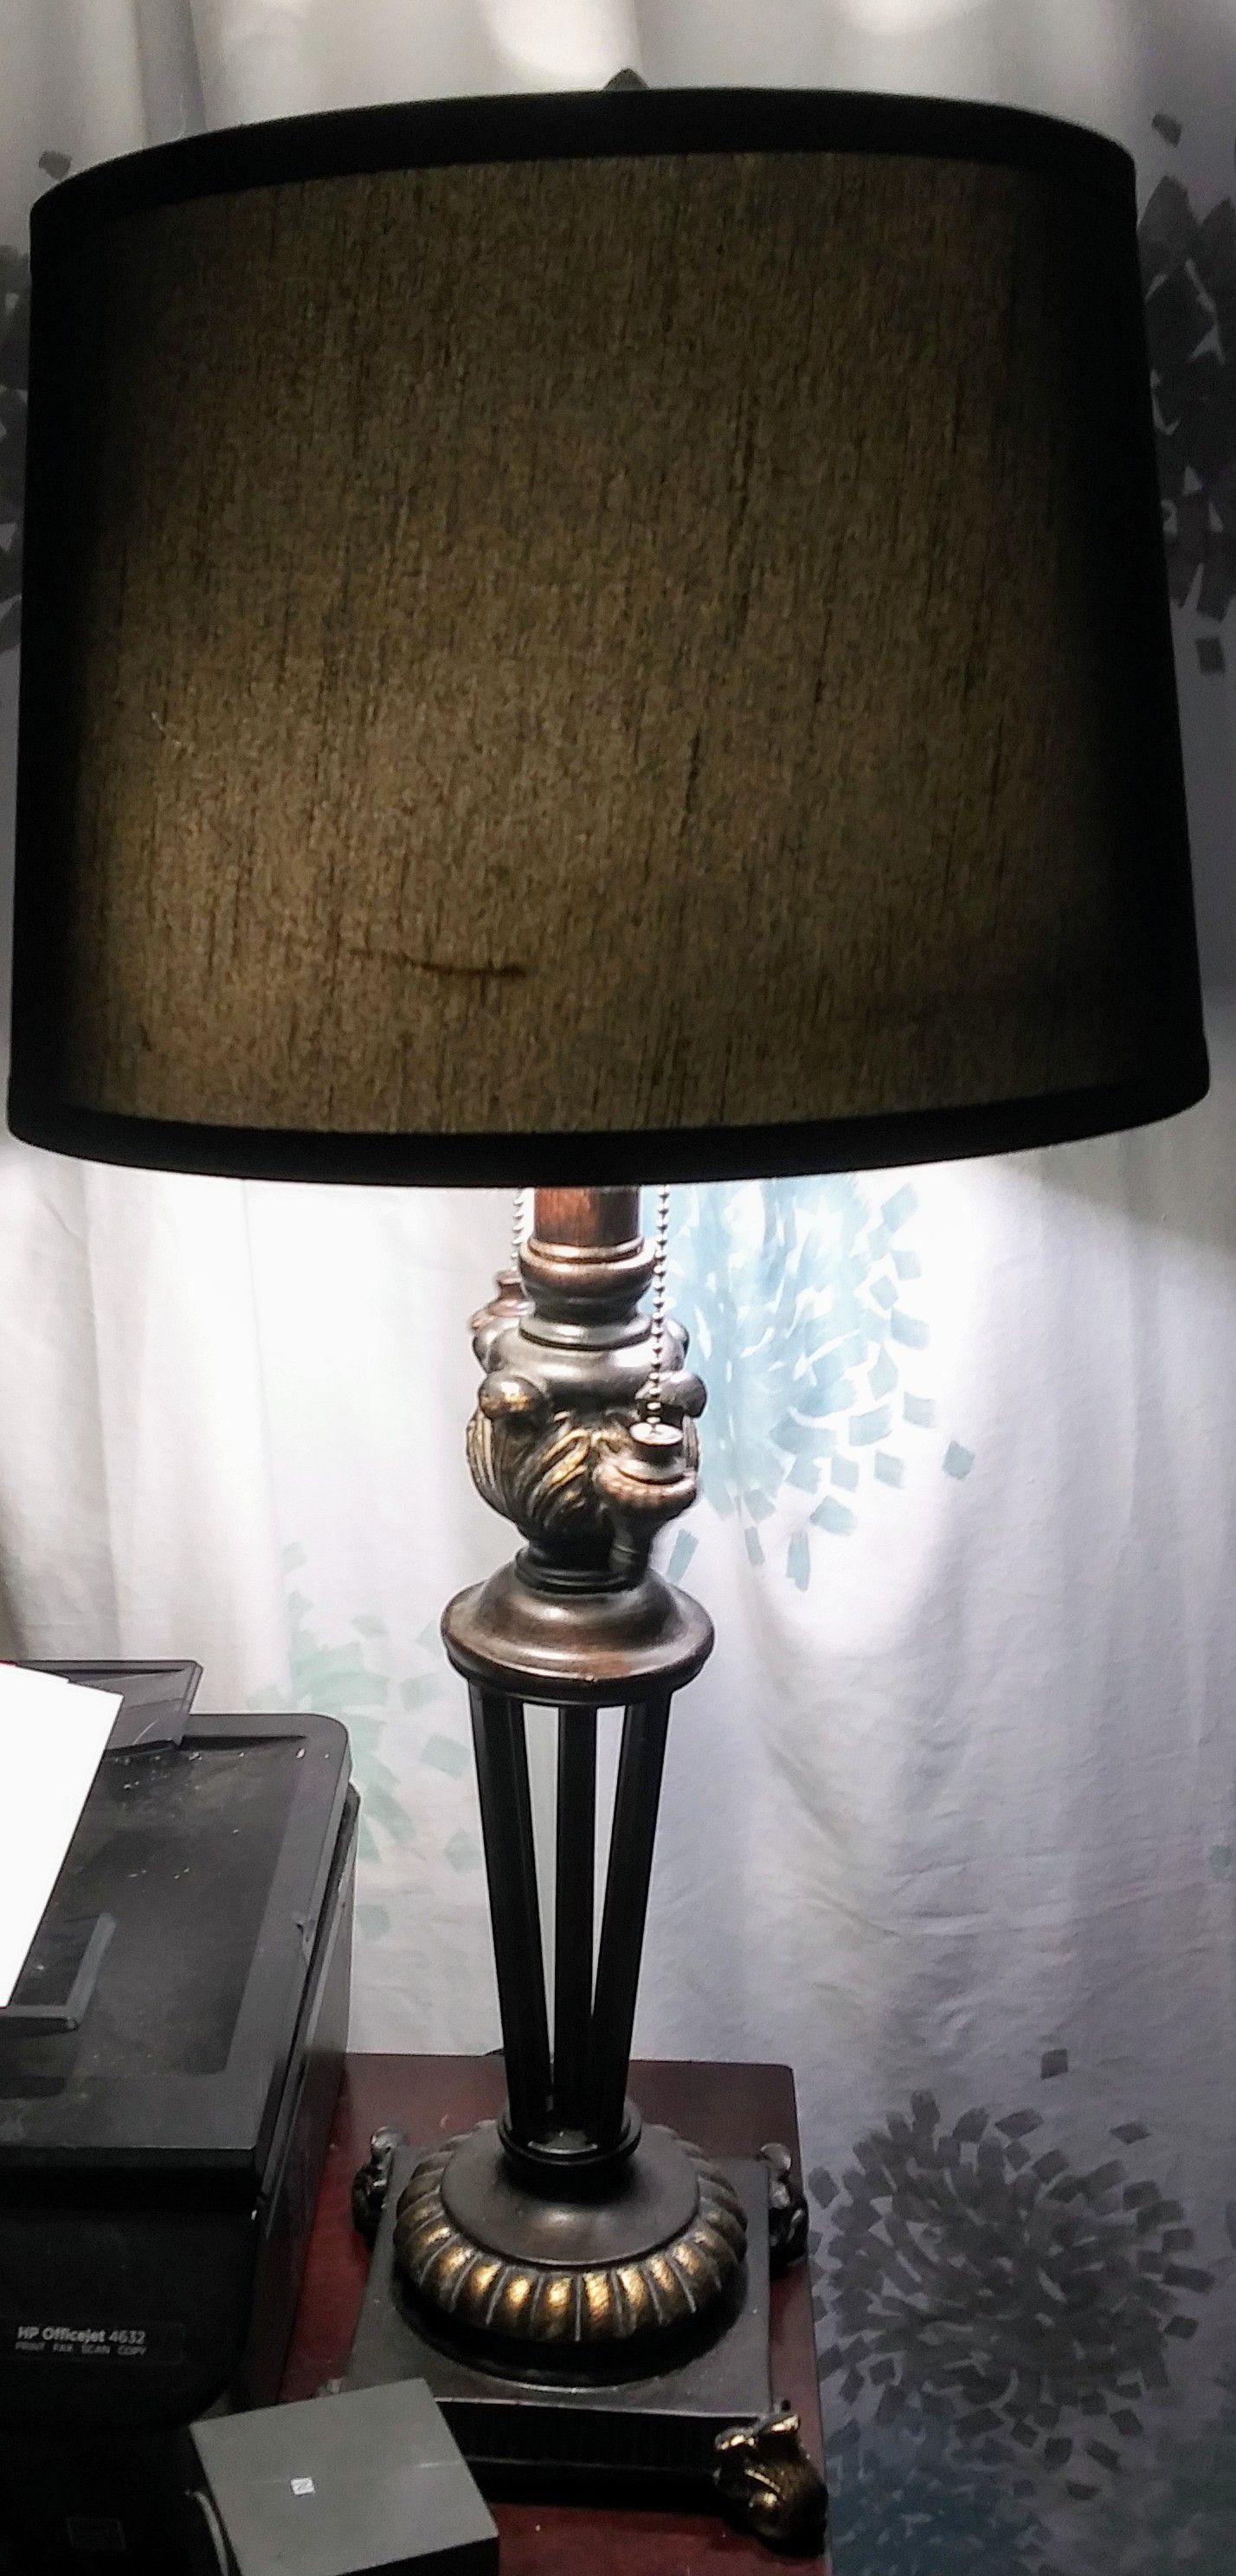 Set of 2 lamps. New only used for about a week. $80 firm